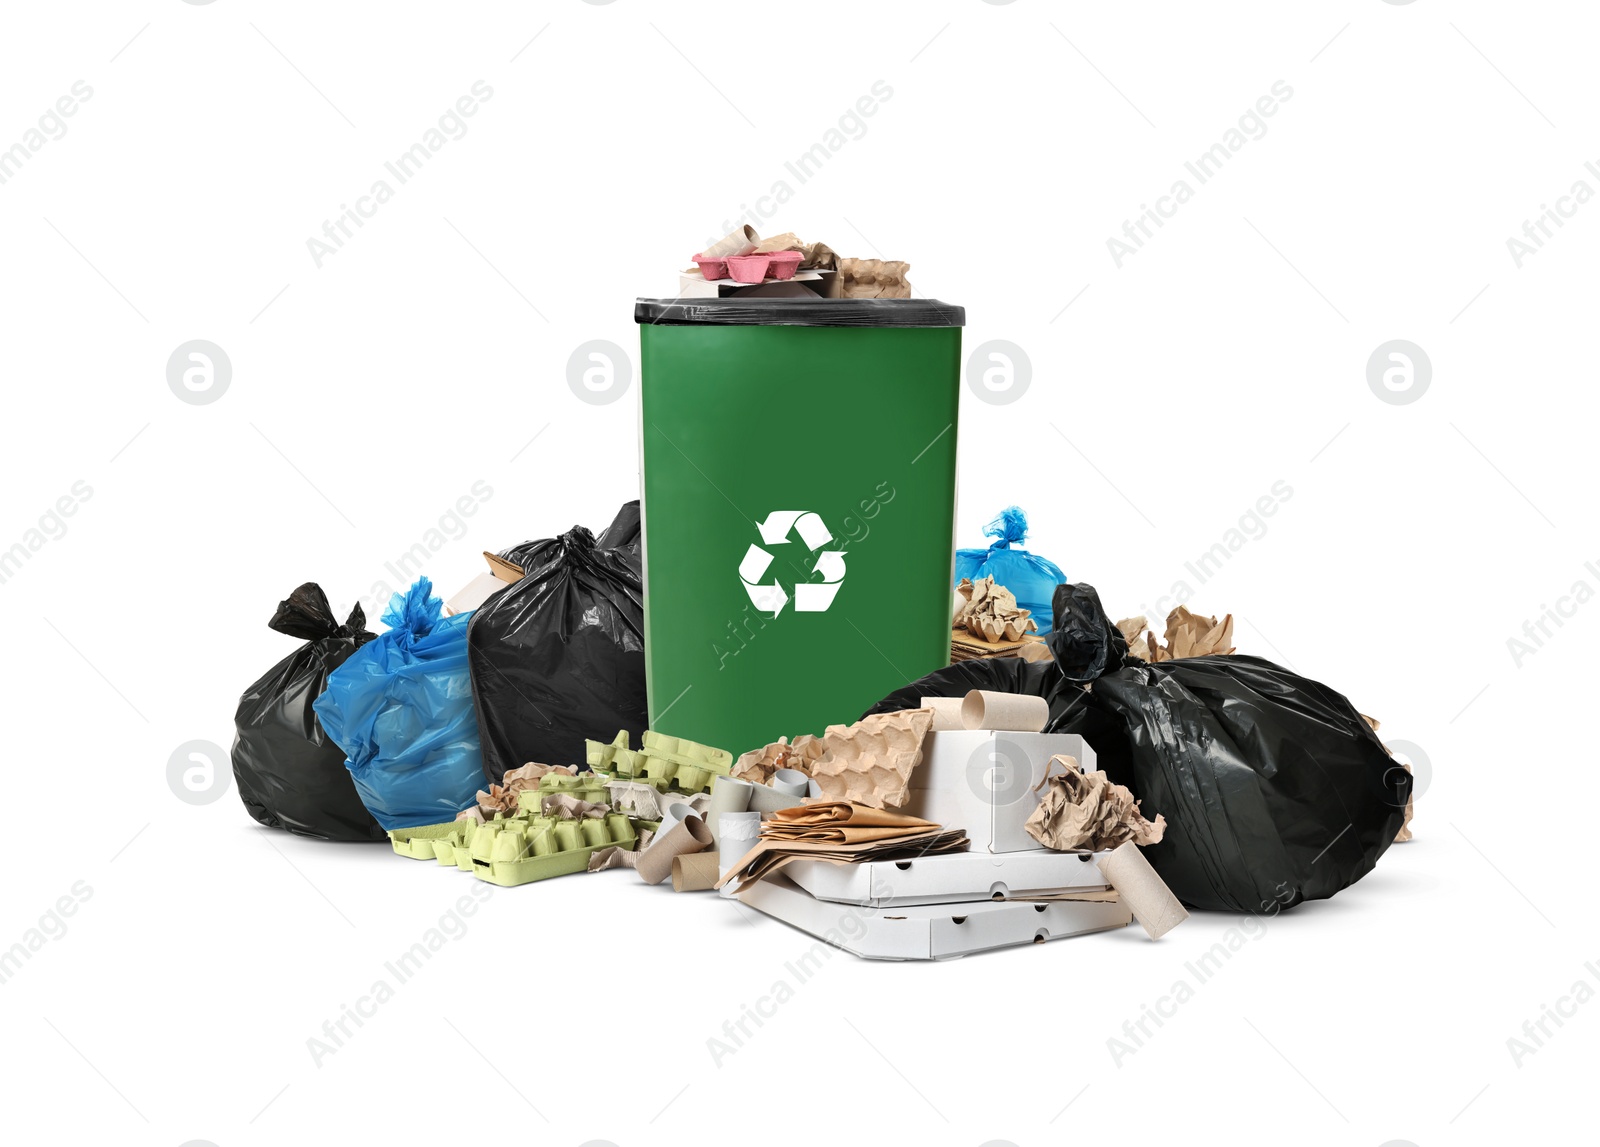 Image of Waste bin, plastic bags and garbage on white background